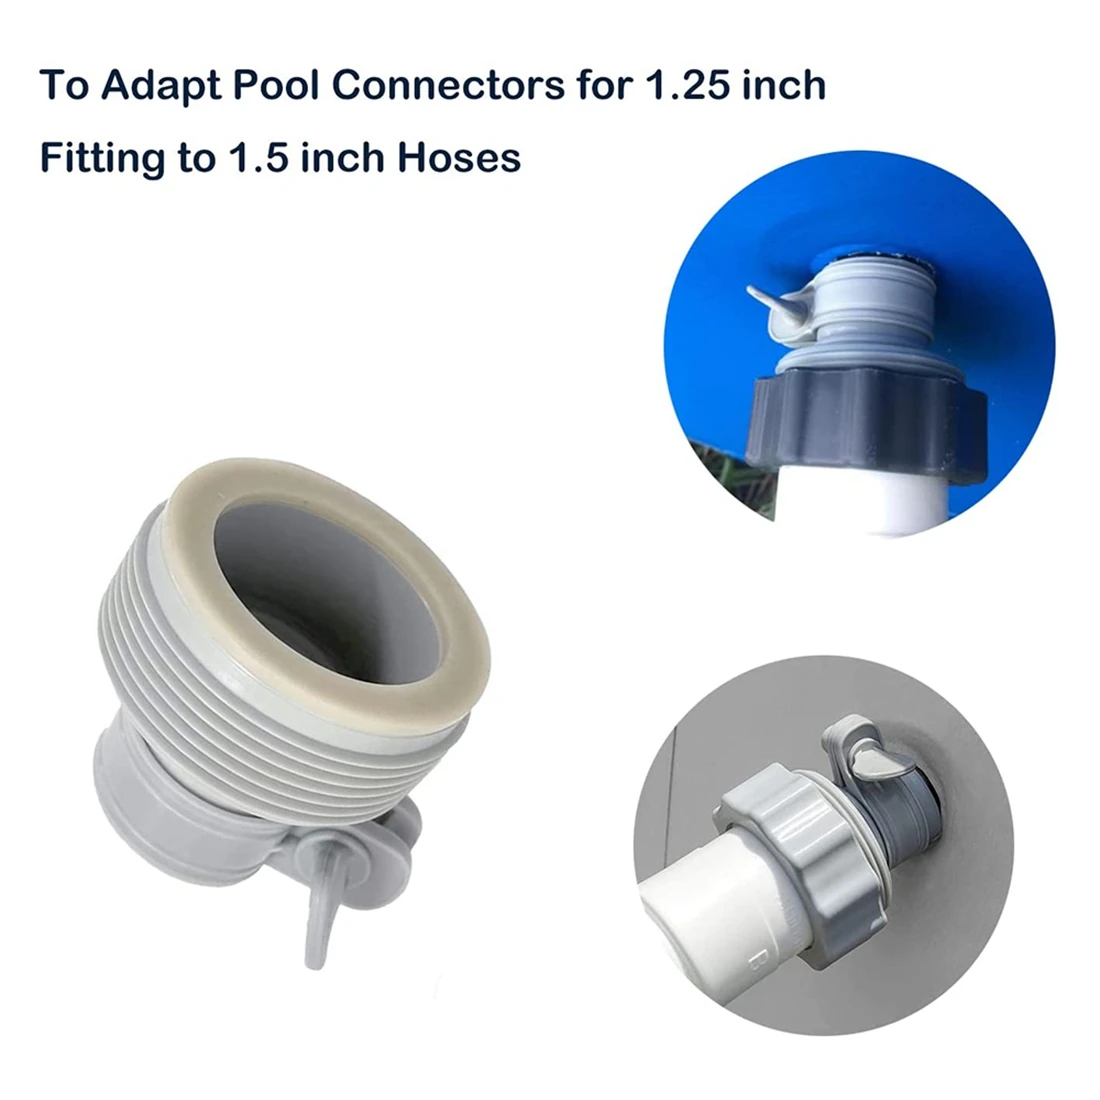 

4PCS 1.25Inch to 1.5Inch Type B Hose Adapters Hose Conversion Kit Adapter B for Intex Pool Filter Pumps&Saltwater System